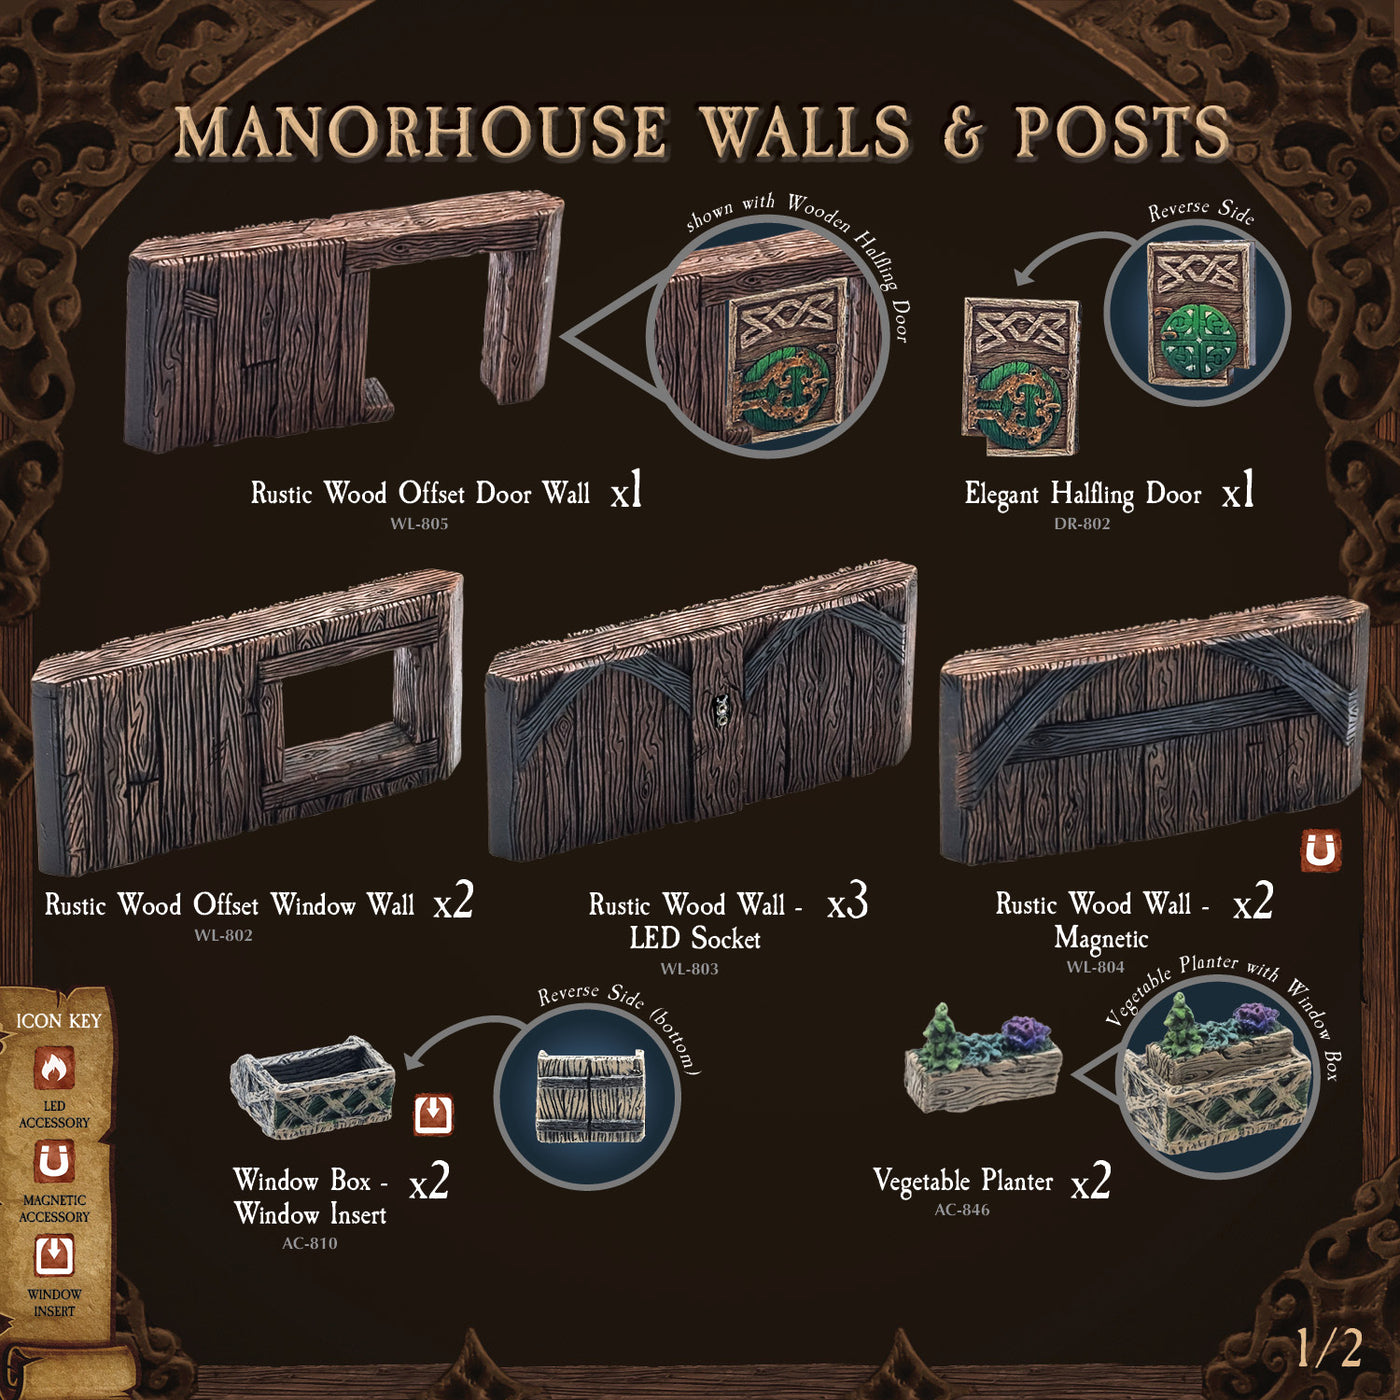 Rustic Wood Core - Manorhouse Walls & Posts (Painted)